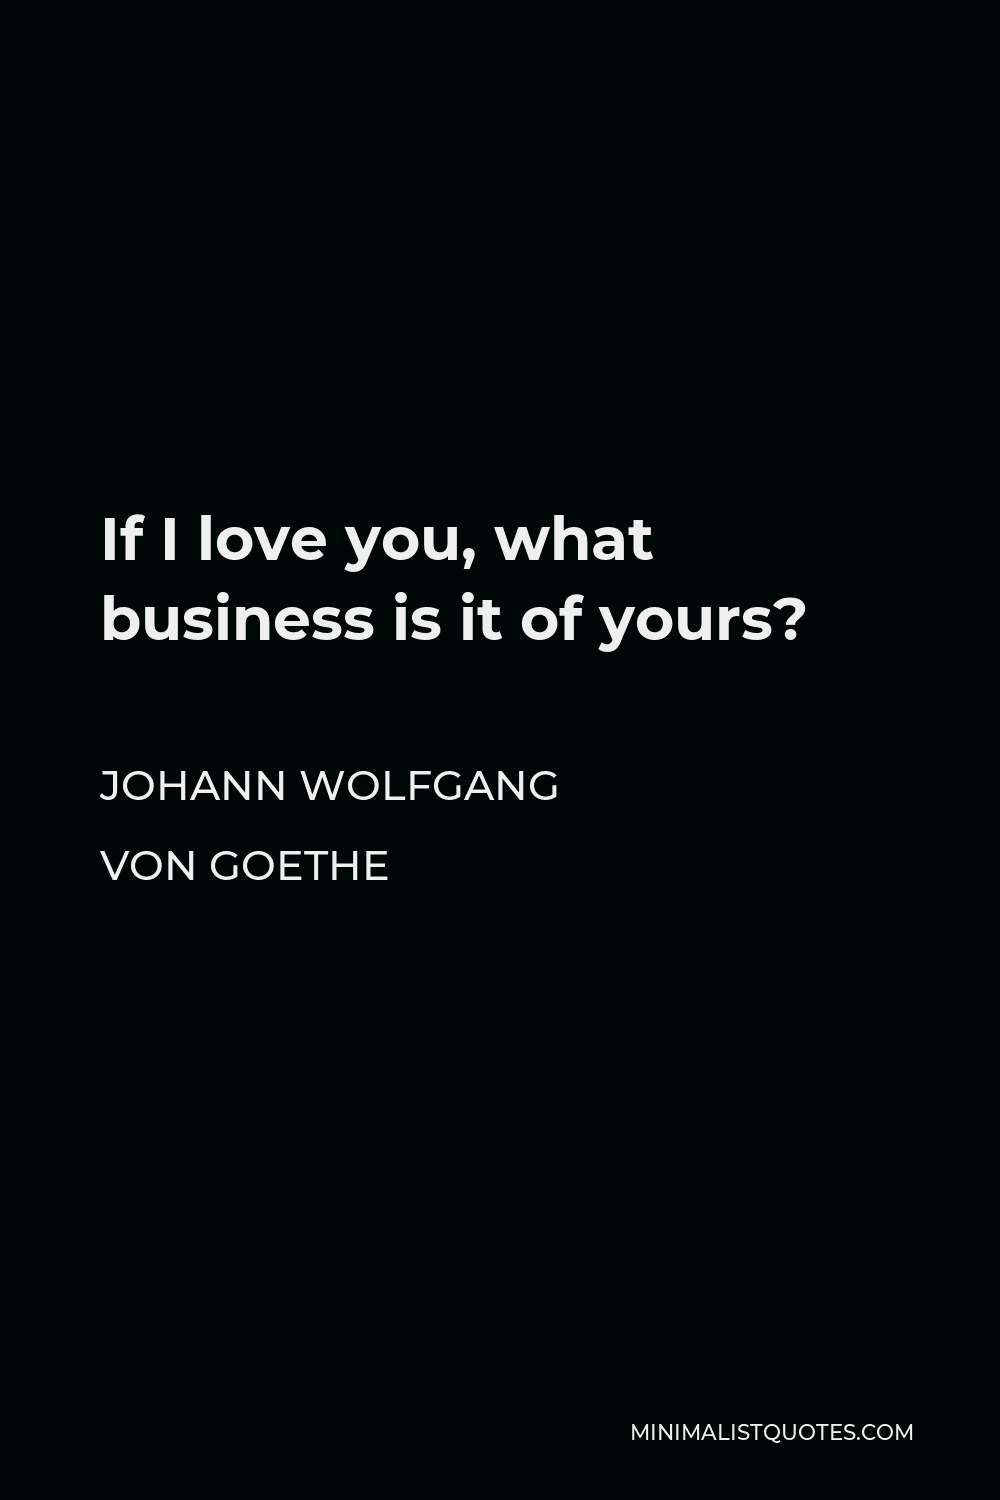 Johann Wolfgang von Goethe Quote - If I love you, what business is it of yours?